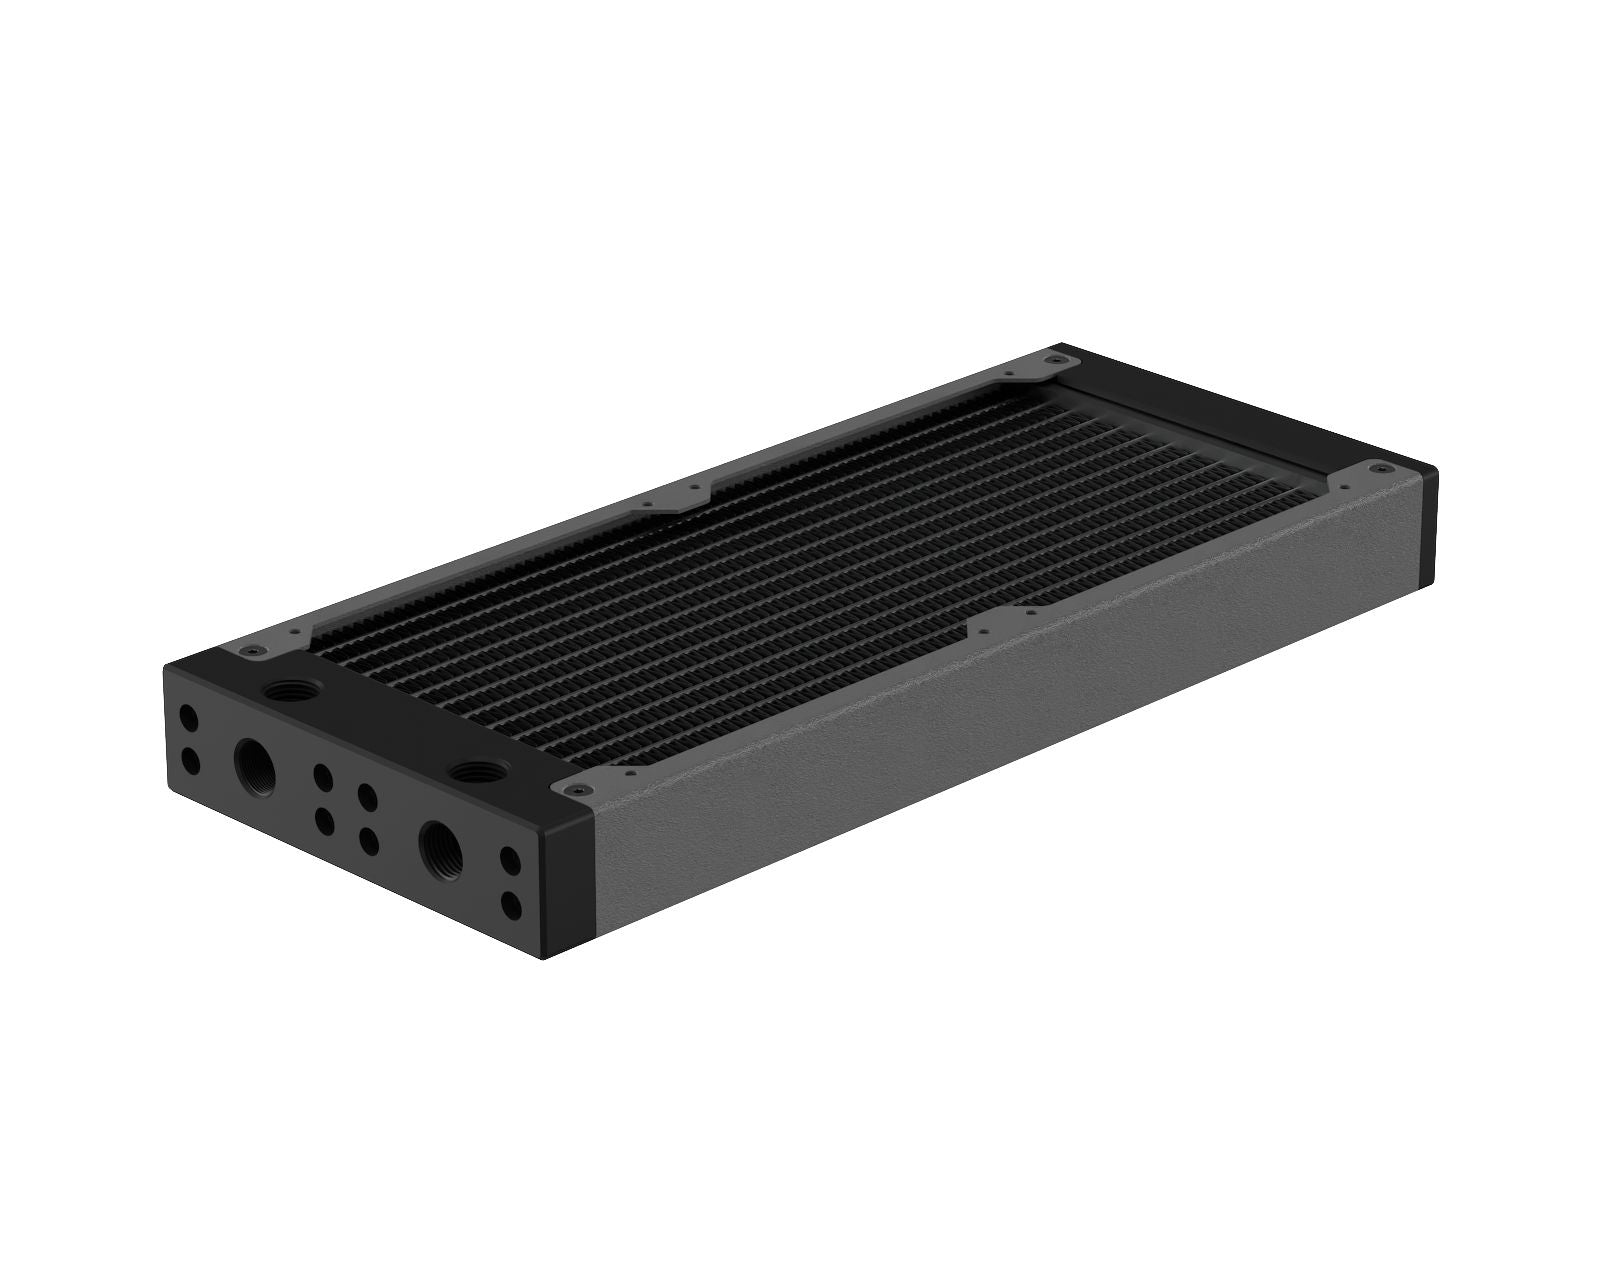 PrimoChill 240SL (30mm) EXIMO Modular Radiator, Black POM, 2x120mm, Dual Fan (R-SL-BK24) Available in 20+ Colors, Assembled in USA and Custom Watercooling Loop Ready - TX Matte Gun Metal